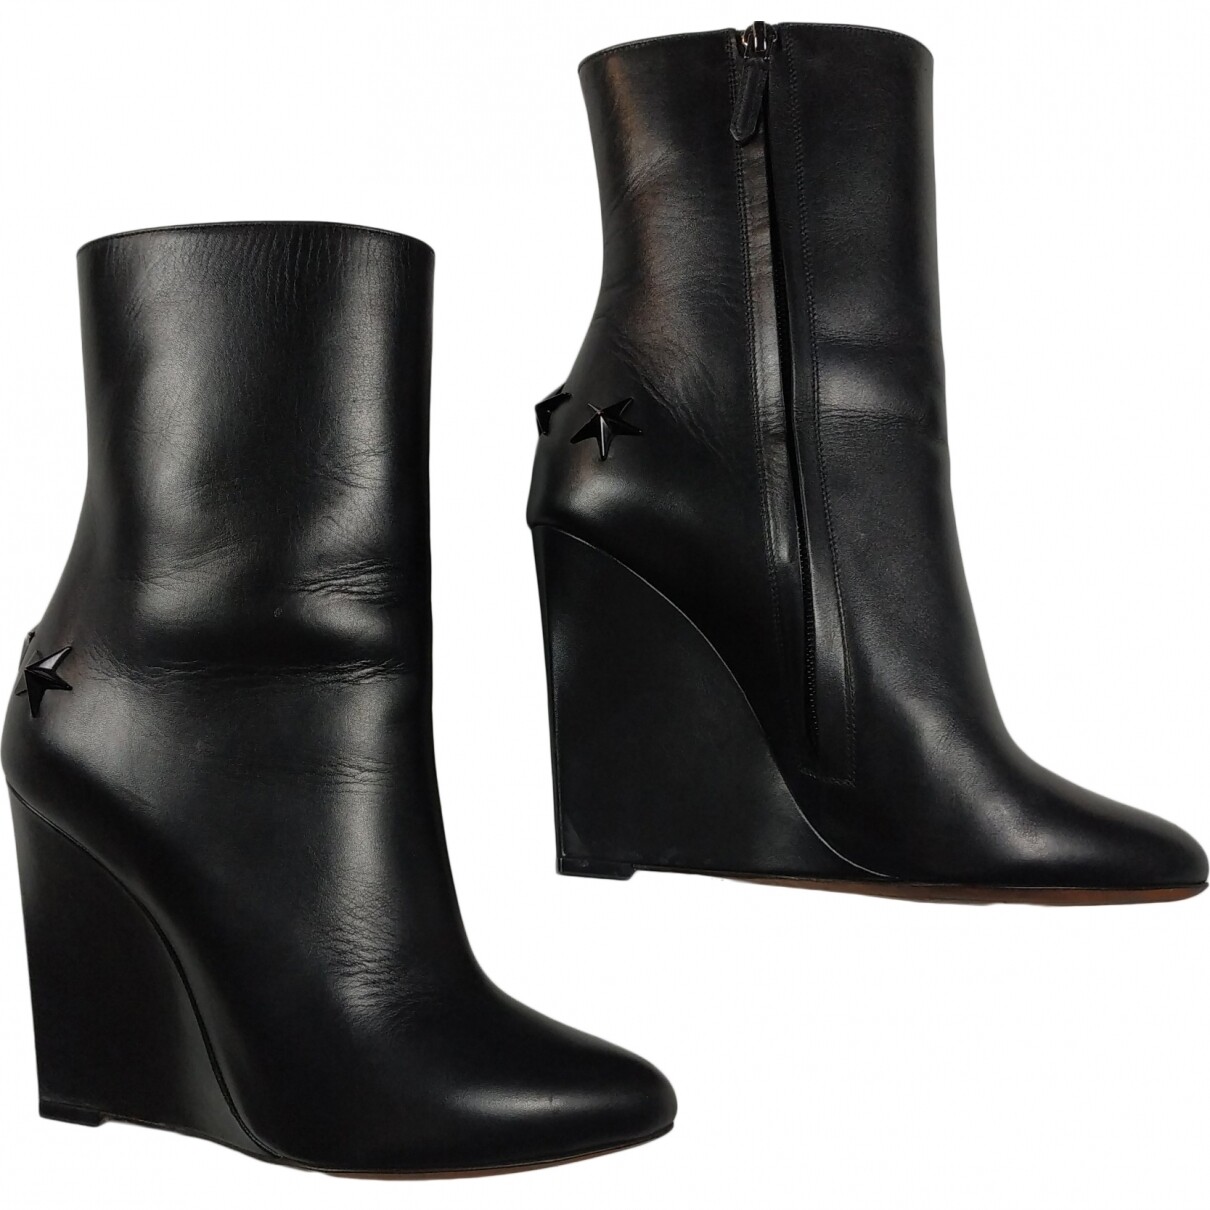 Givenchy Stars ankle boots, size 38,5